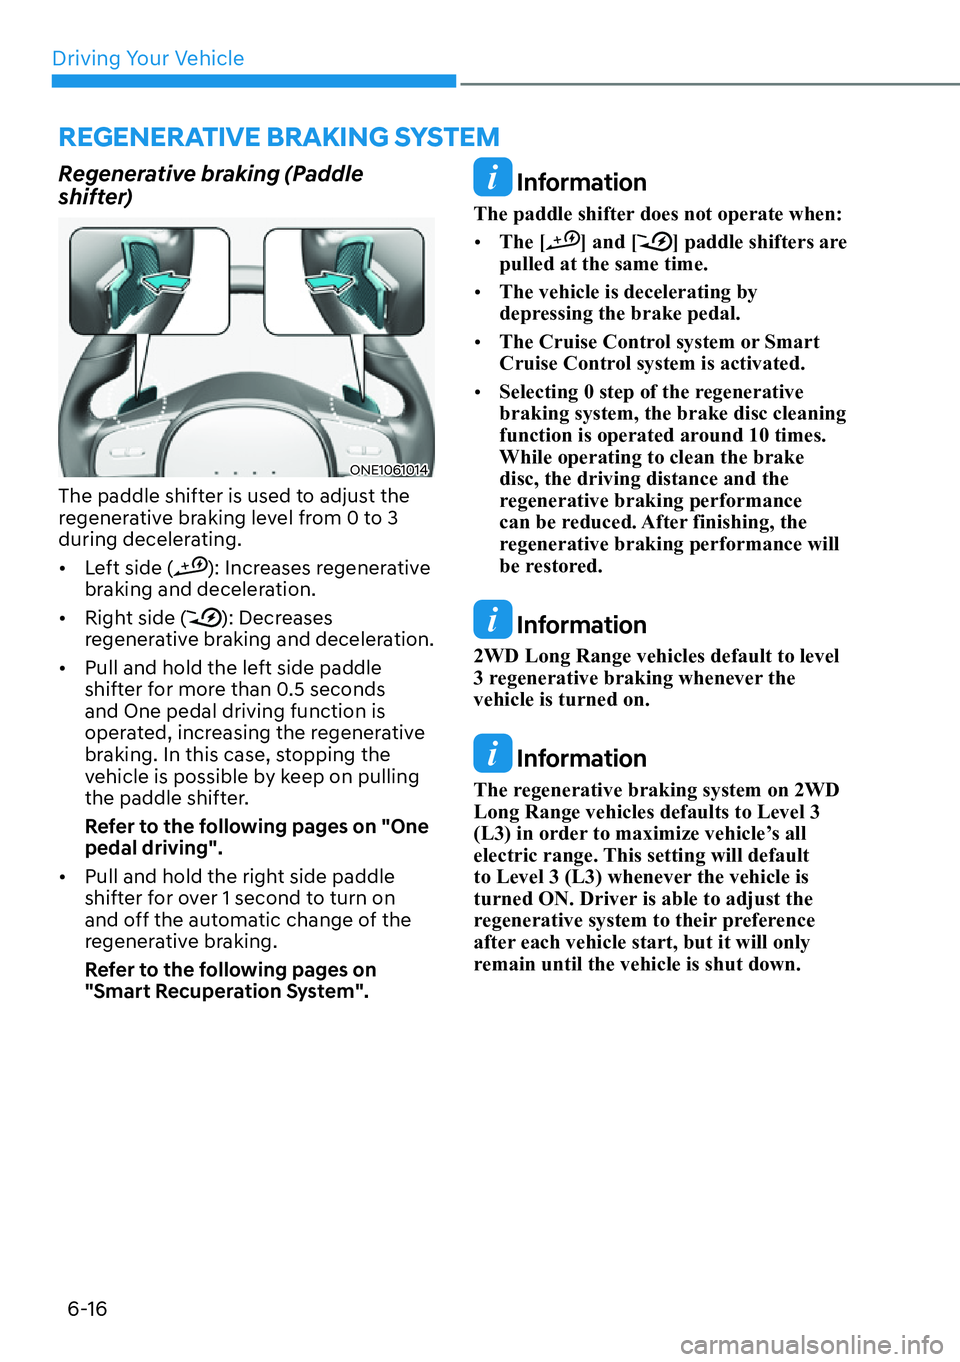 HYUNDAI IONIQ 5 2022  Owners Manual Driving Your Vehicle
6-16
Regenerative braking (Paddle 
shifter)
ONE1061014
The paddle shifter is used to adjust the 
regenerative braking level from 0 to 3 
during decelerating.
[�Left side (
): In